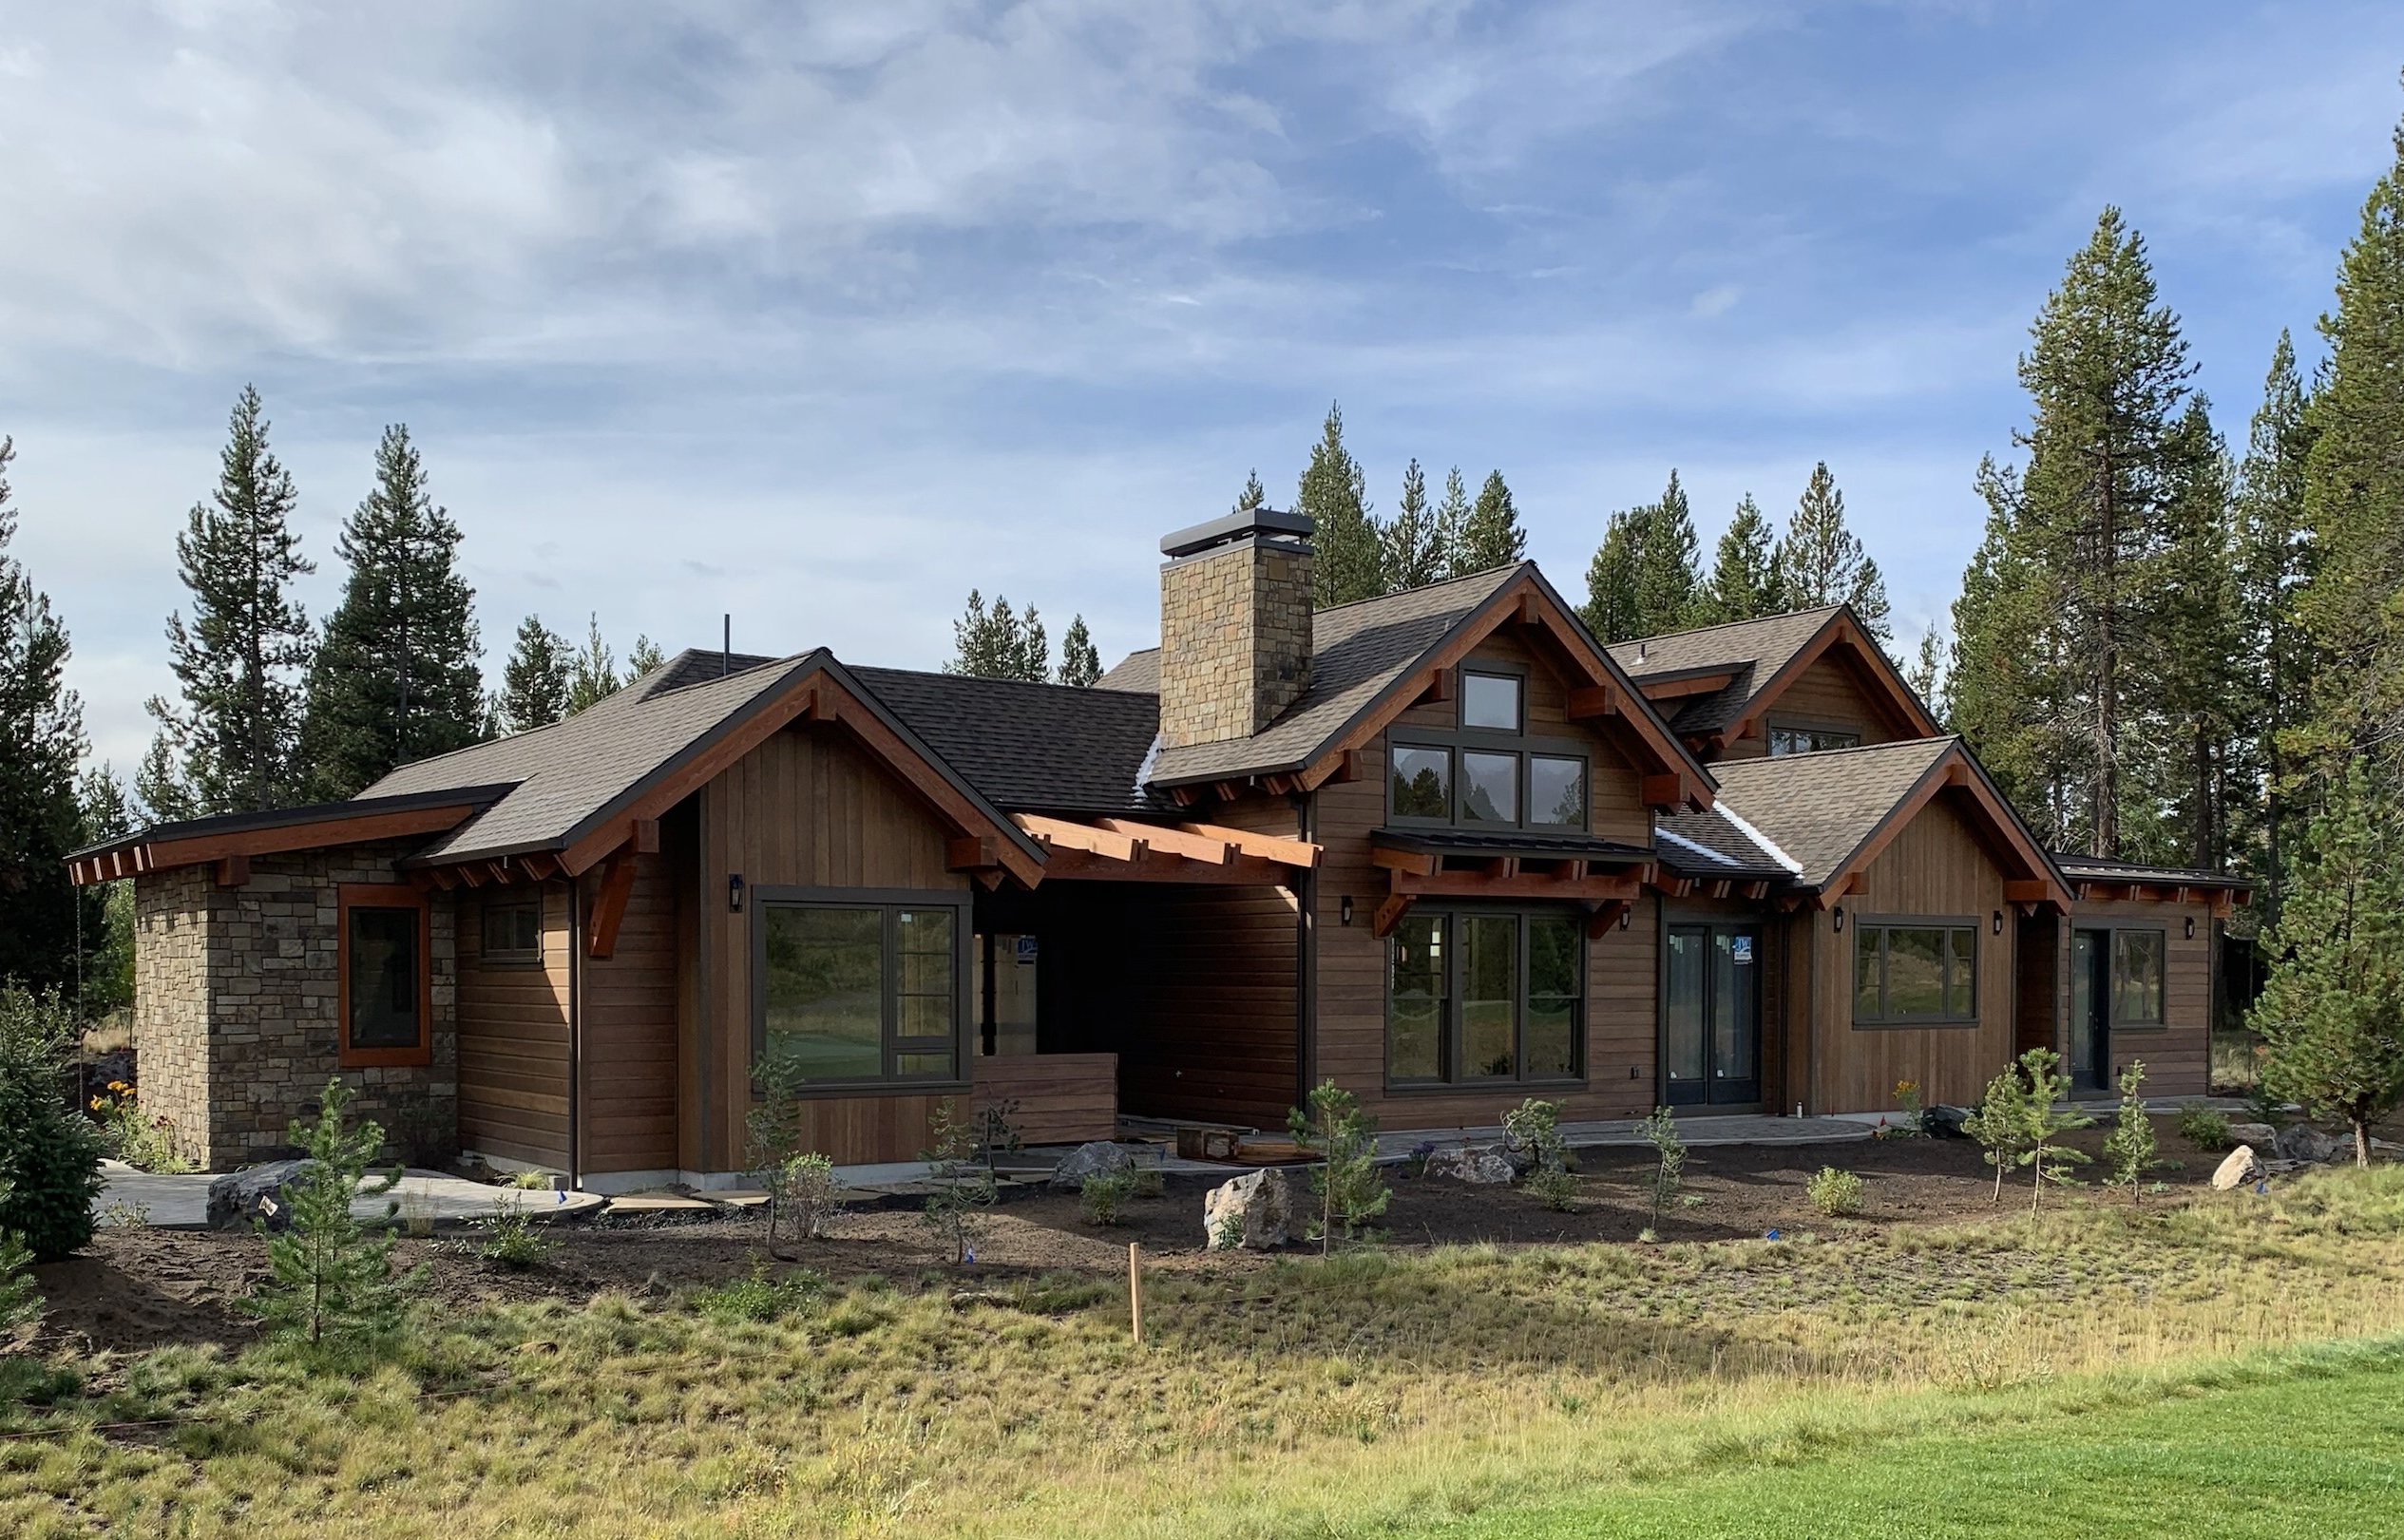 Nova USA Wood Products to Showcase Oregonian-Canadian Forest Products with ExoClad Rainscreen QuickClips at IBS